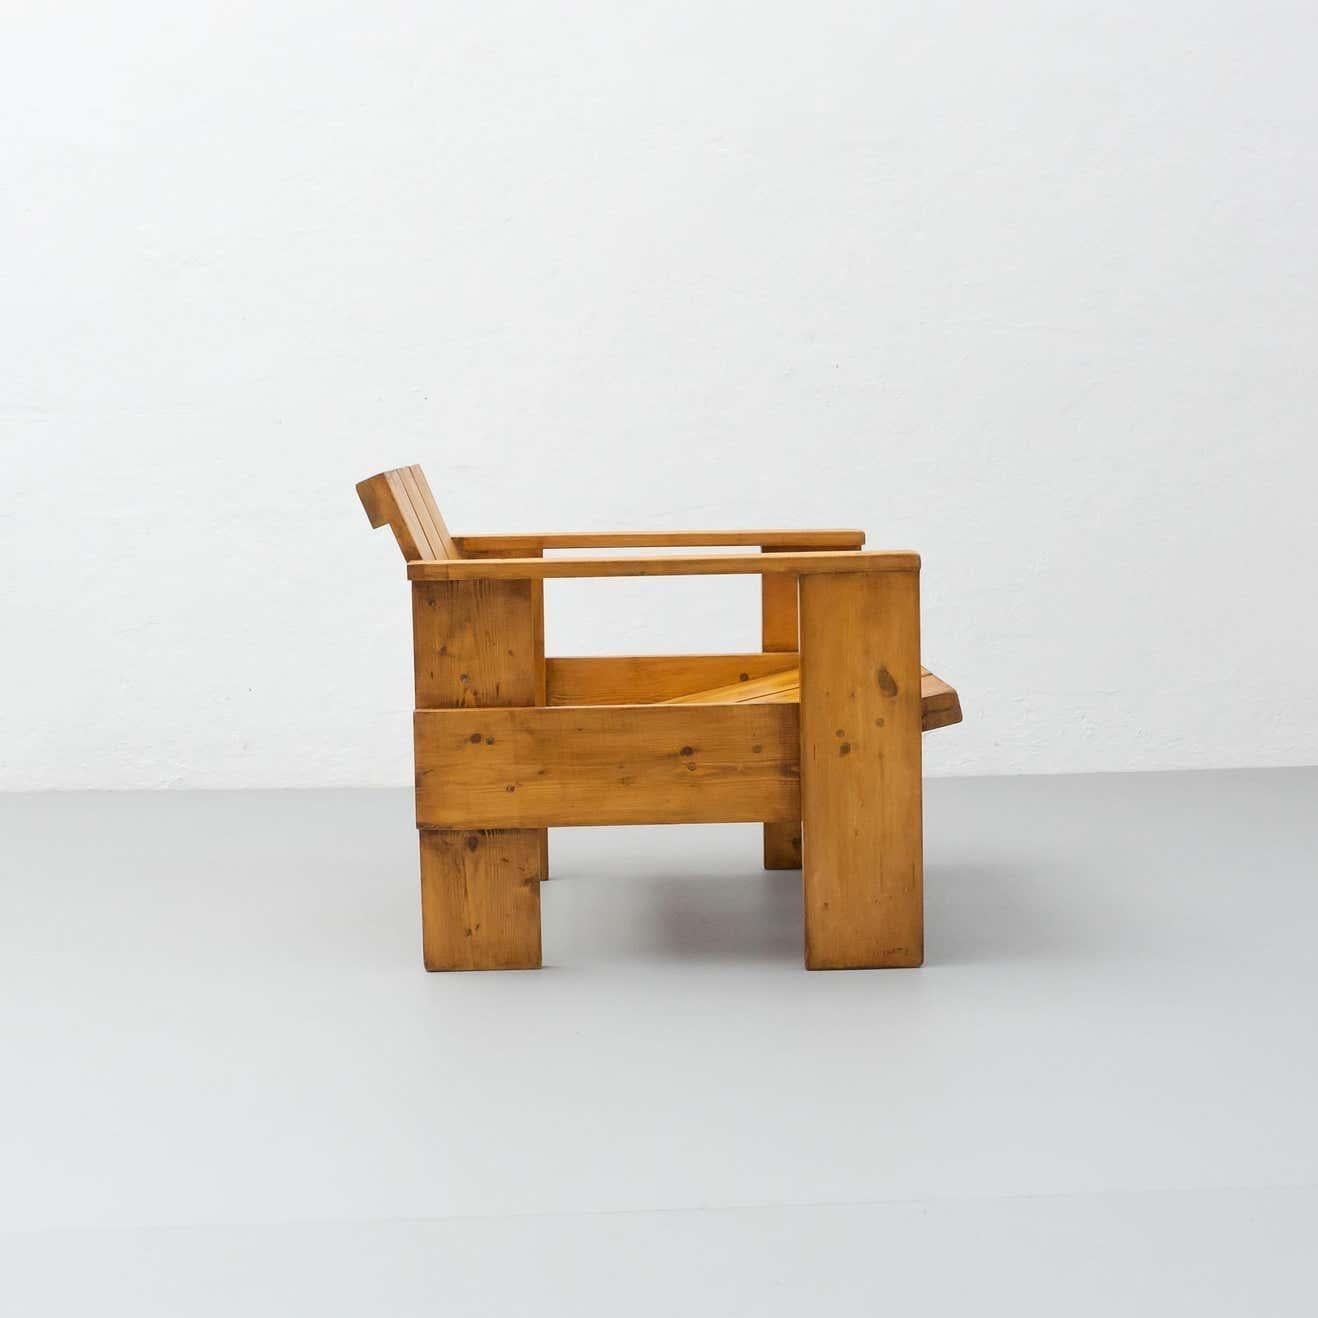 Mid-20th Century Gerrit Rietveld Mid-Century Modern Wood Crate Chair, circa 1950 For Sale